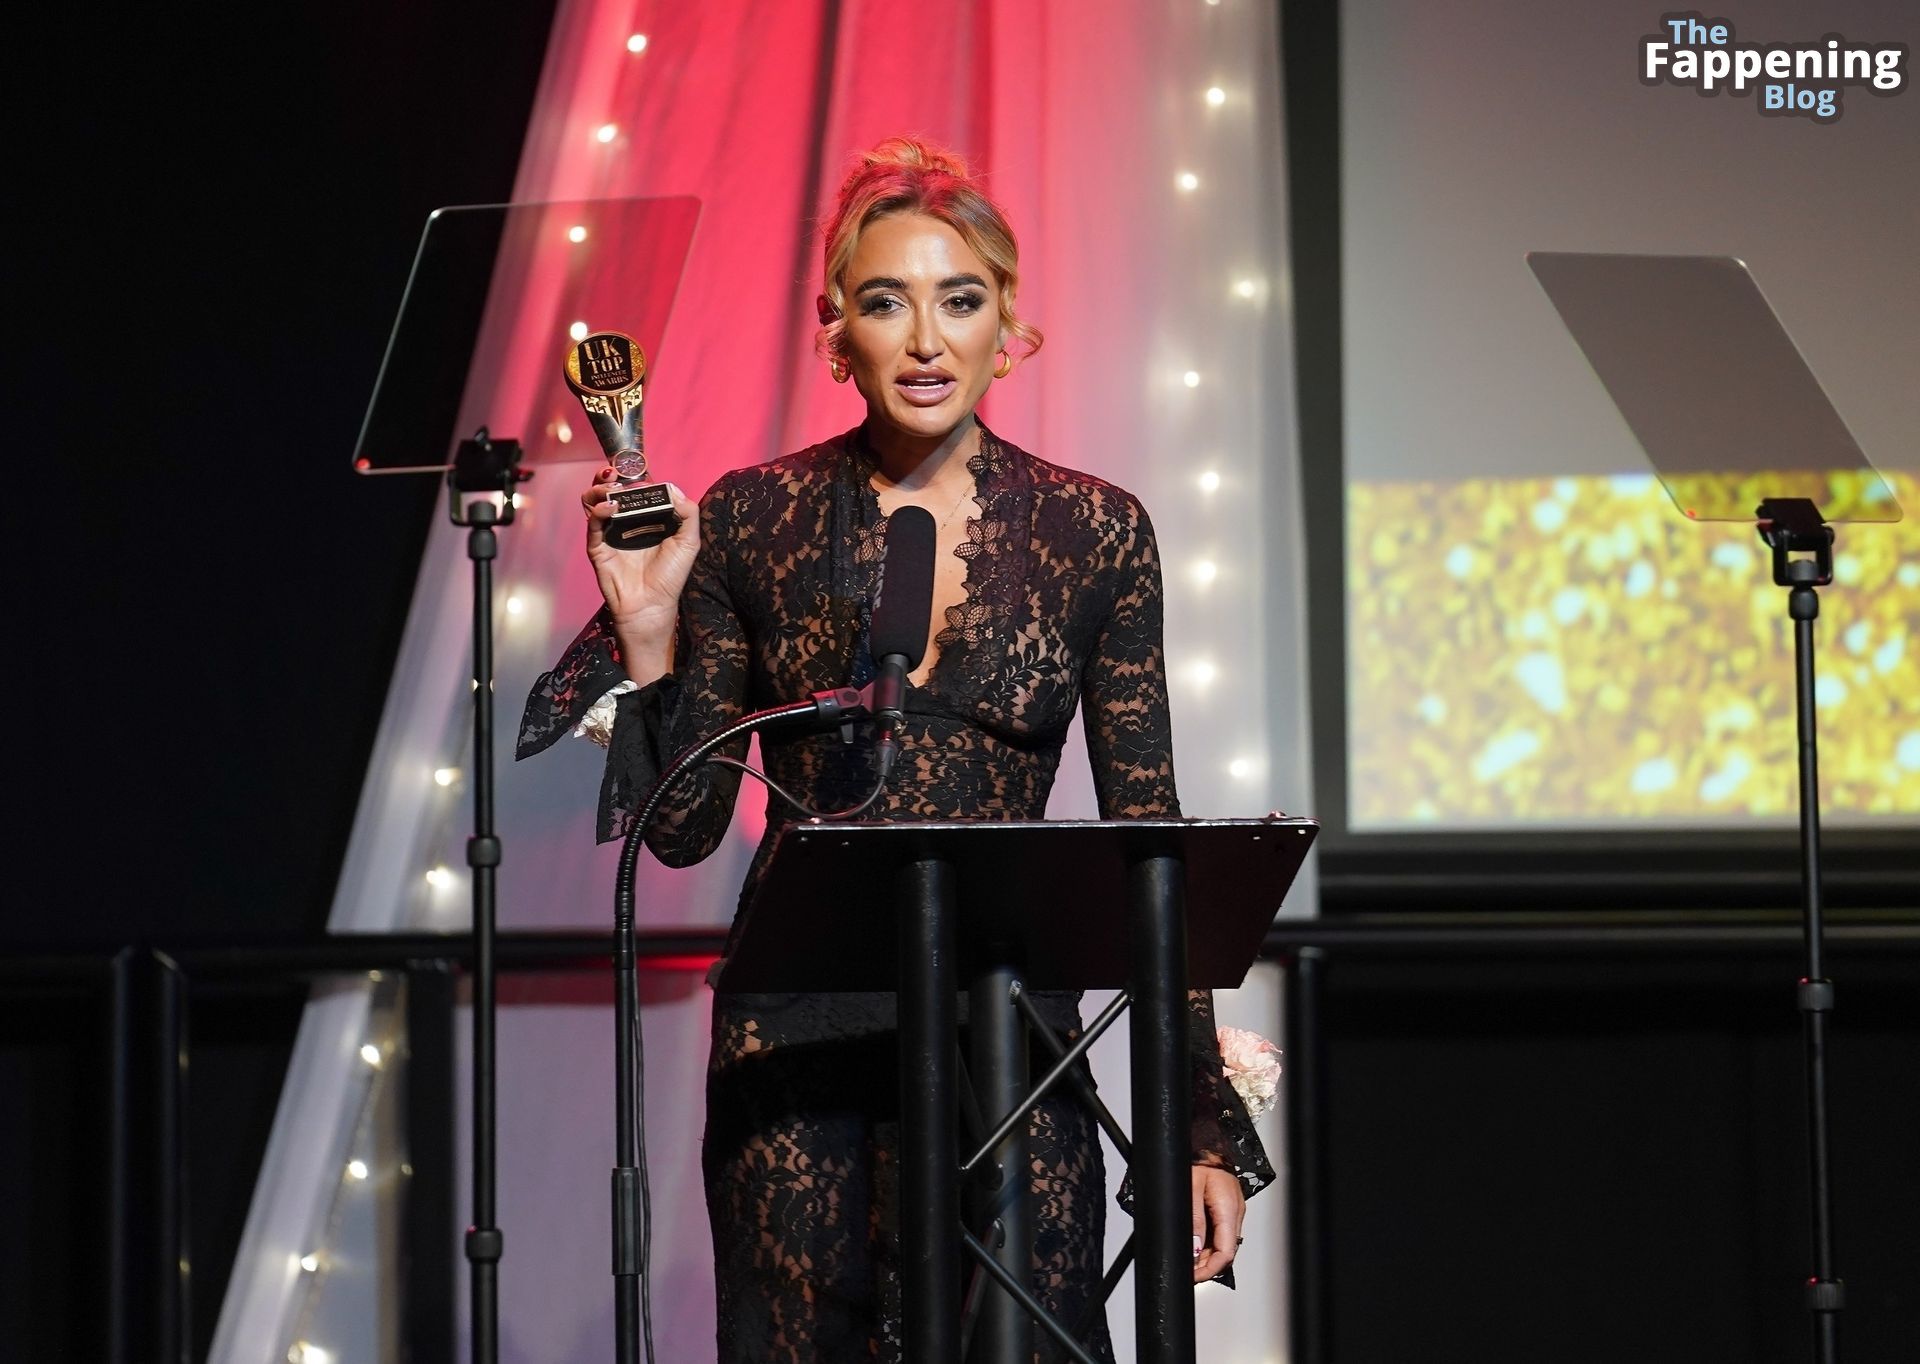 Georgia Harrison Displays Her Nude Tits Wearing a See-Through Lace Dress to Present Awards in Newcastle (48 Photos)